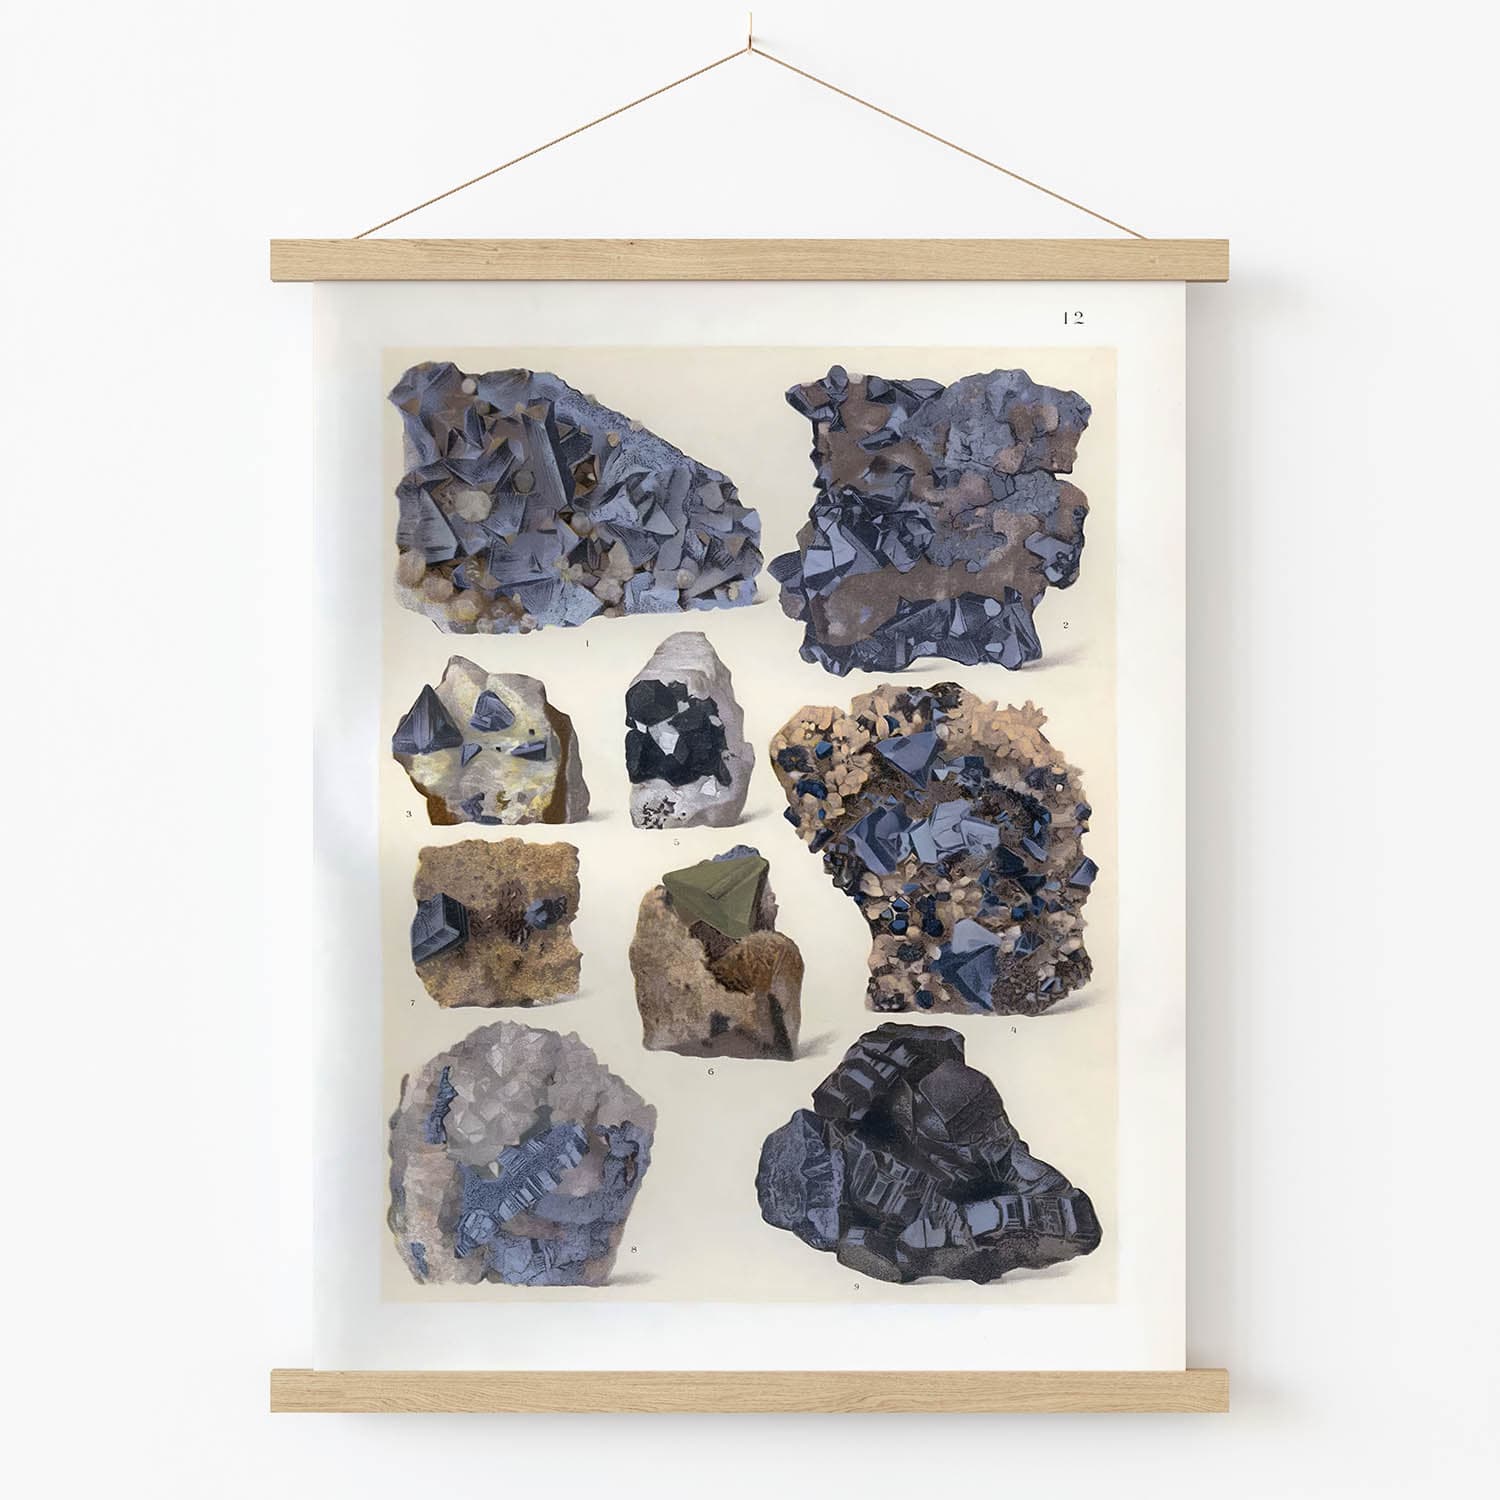 Vintage Rocks and Crystals Art Print in Wood Hanger Frame on Wall